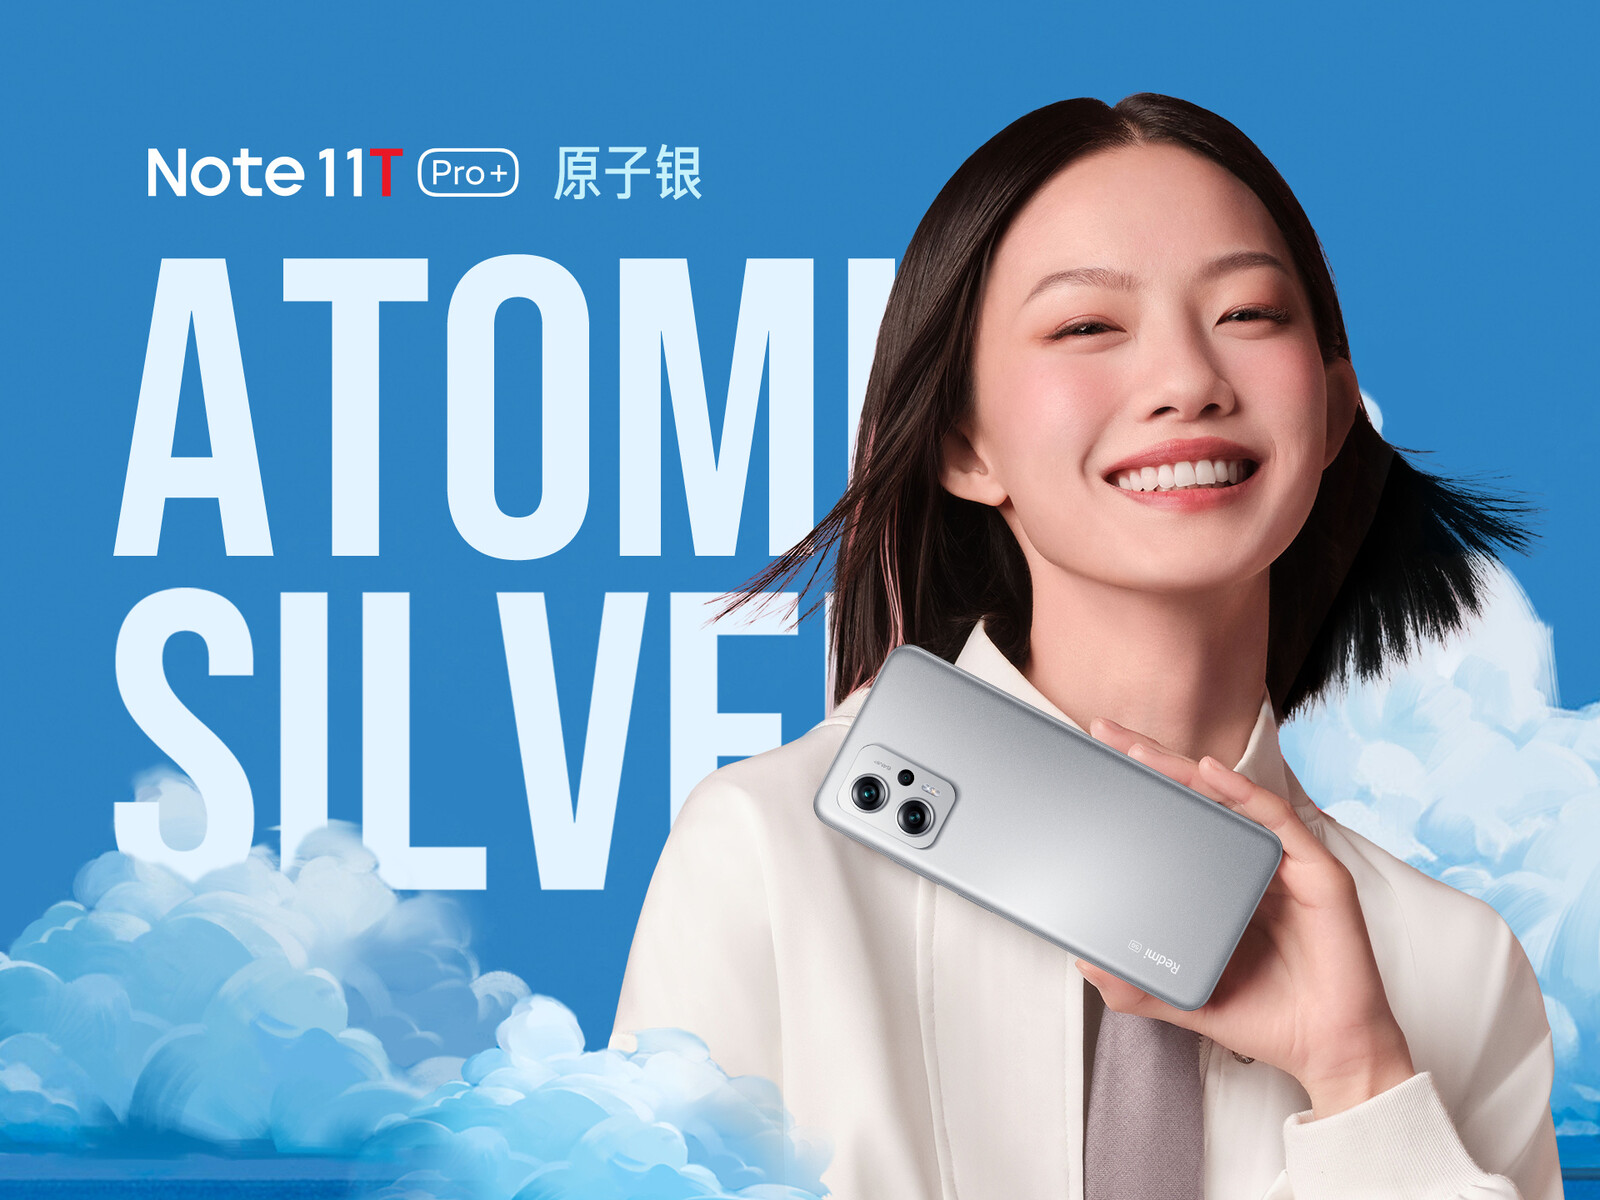 Redmi Note 11T Pro+ packs self-developed Surging P1 chip with 120W fast  charging support - Gizmochina